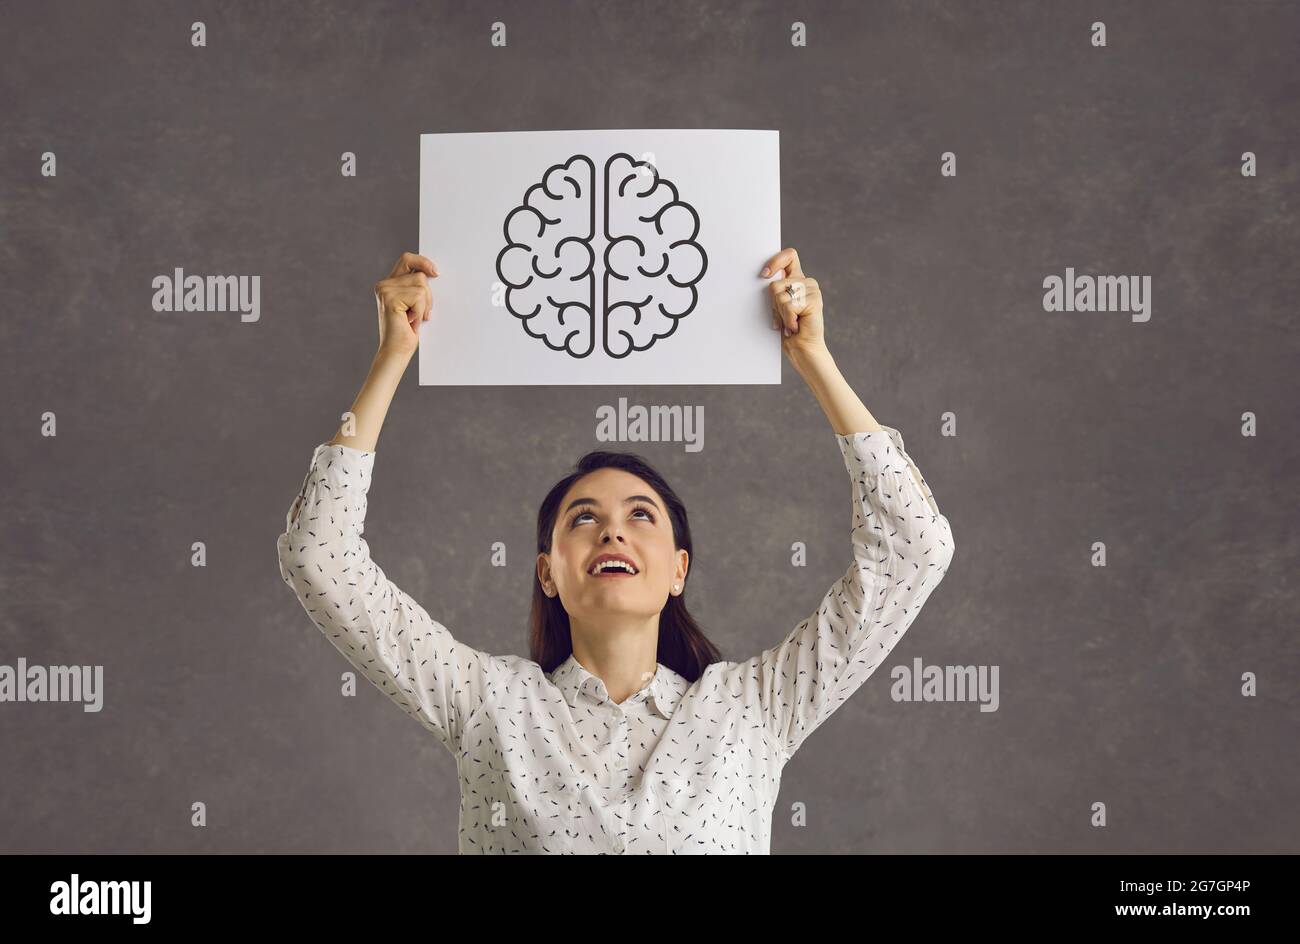 Happy woman holding picture of brain as symbol of mental health and intellectual development Stock Photo